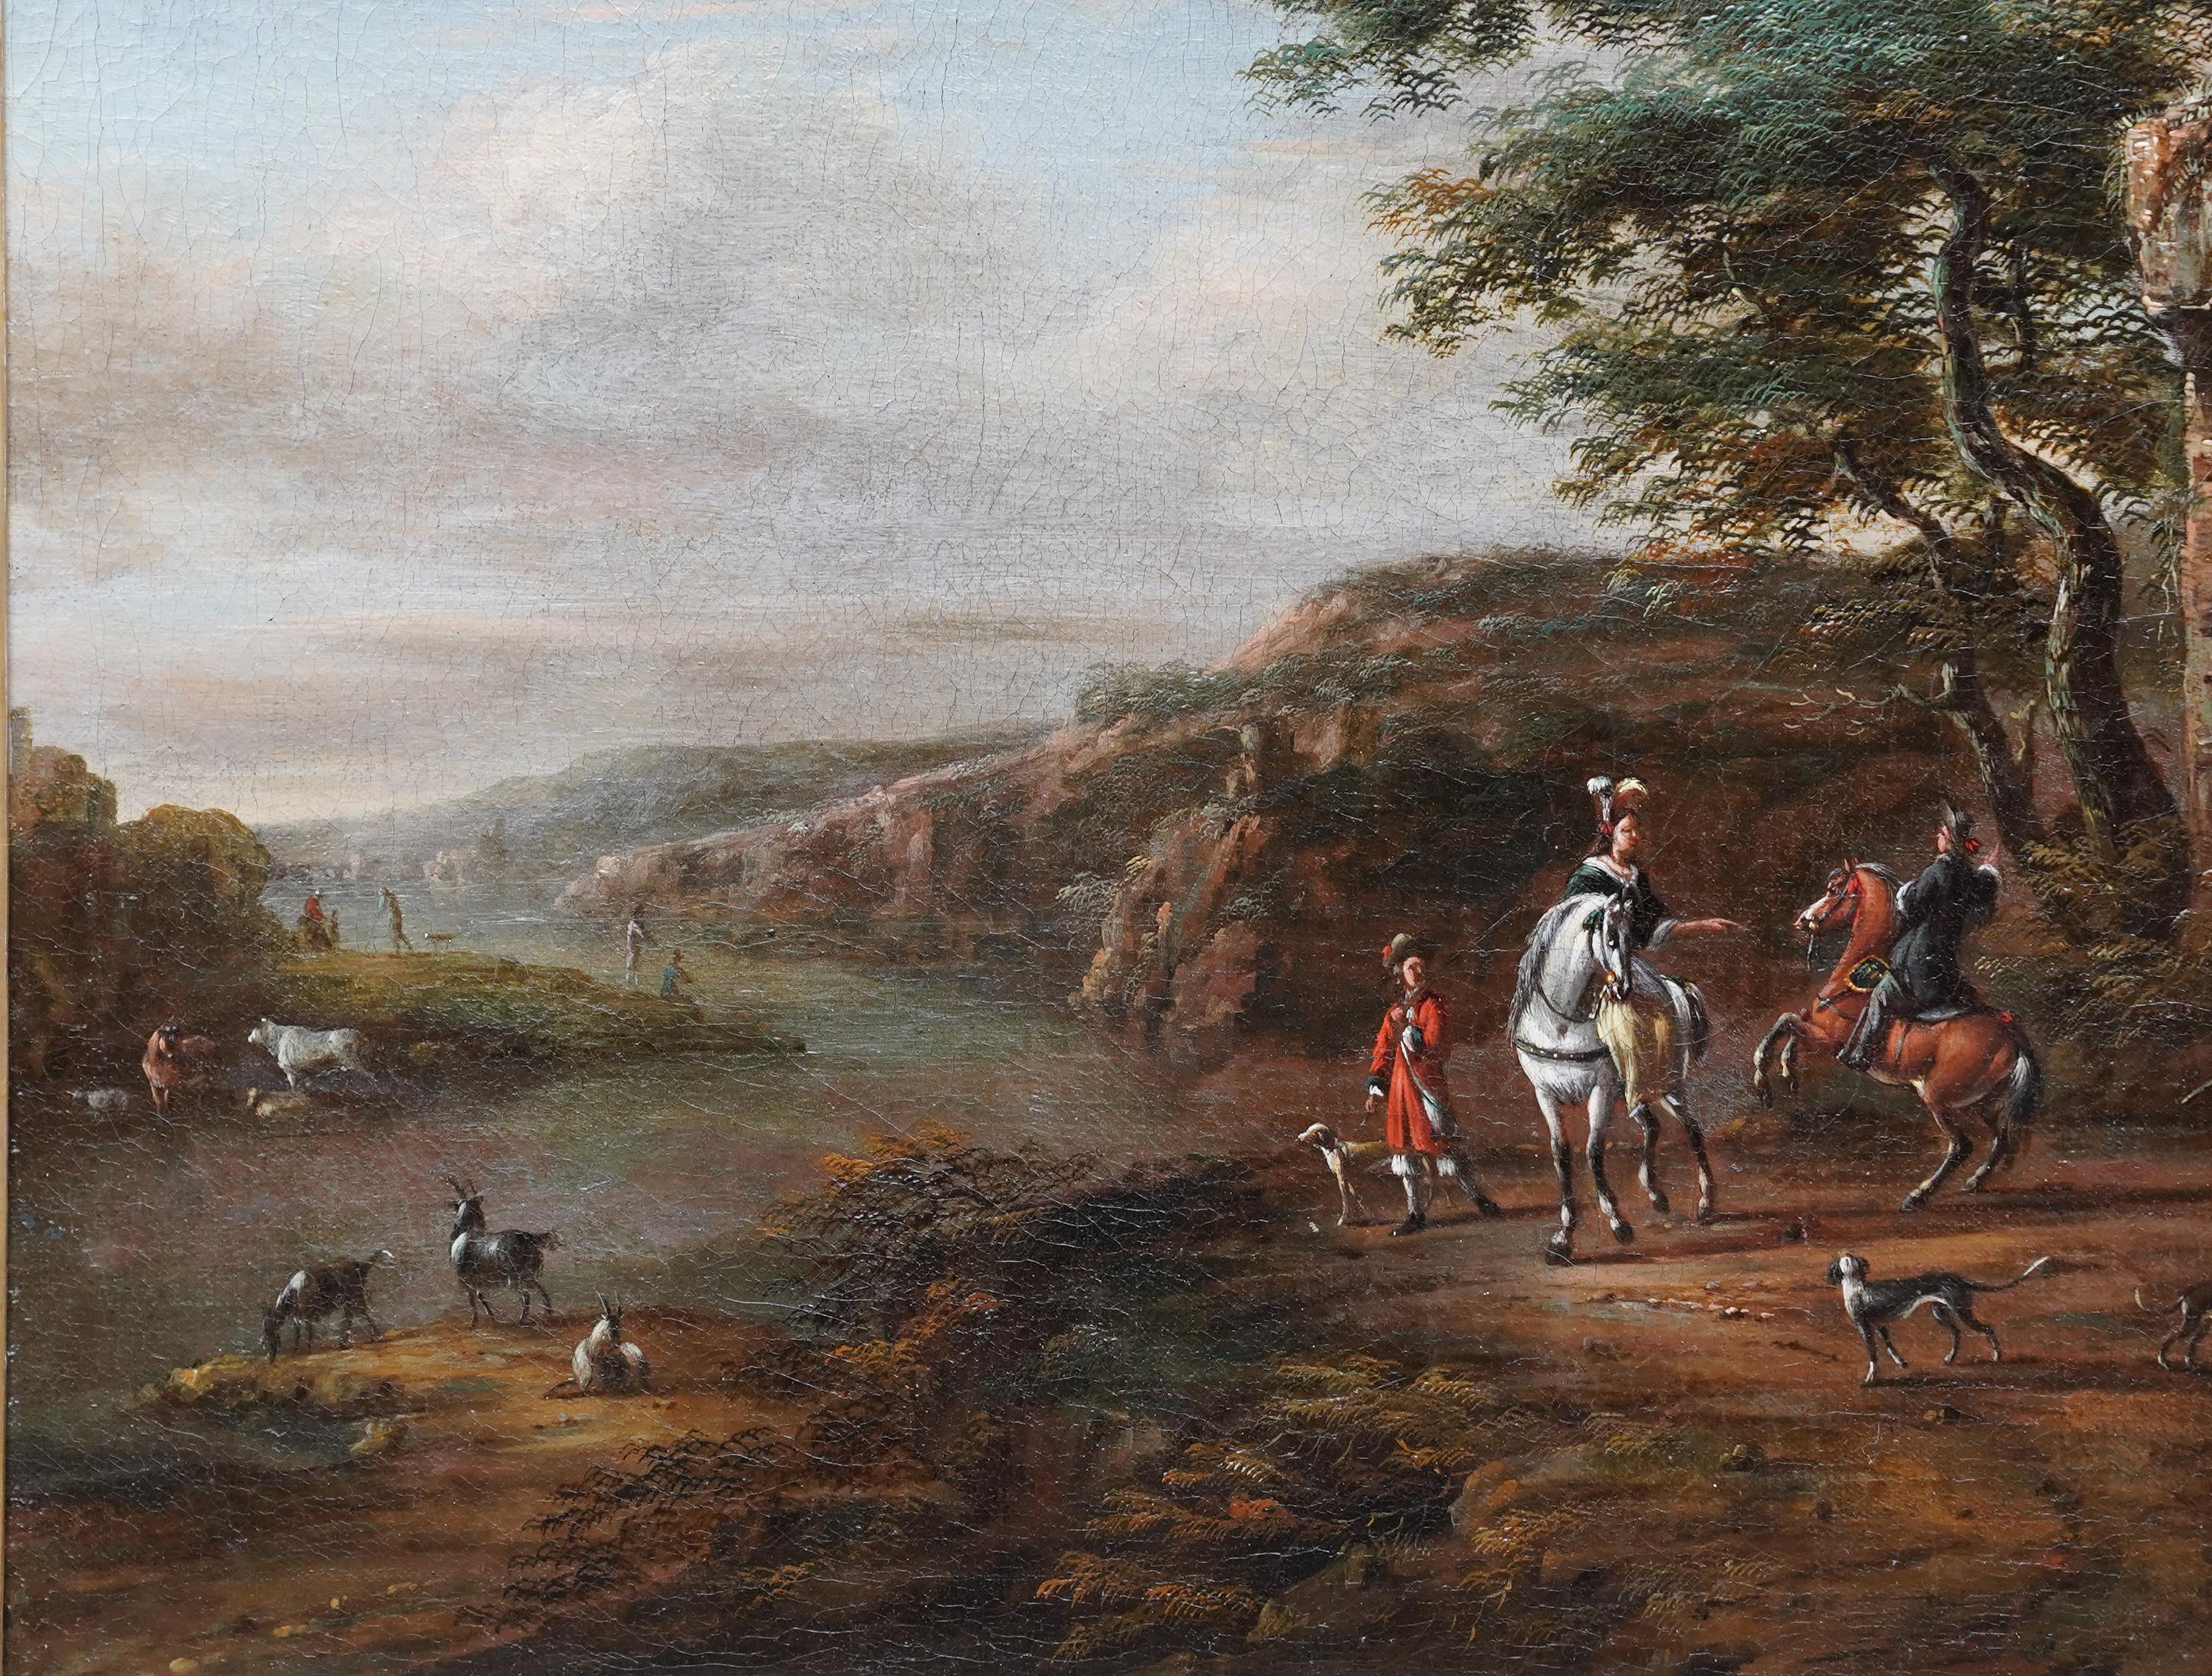 This lovely Dutch Old Master oil painting is attributed to artist Pieter Wouwerman. Painted circa 1660 it is figurative landscape with horseback travellers and their dogs in the foreground with ruins on their right. Beyond is a river and hilly